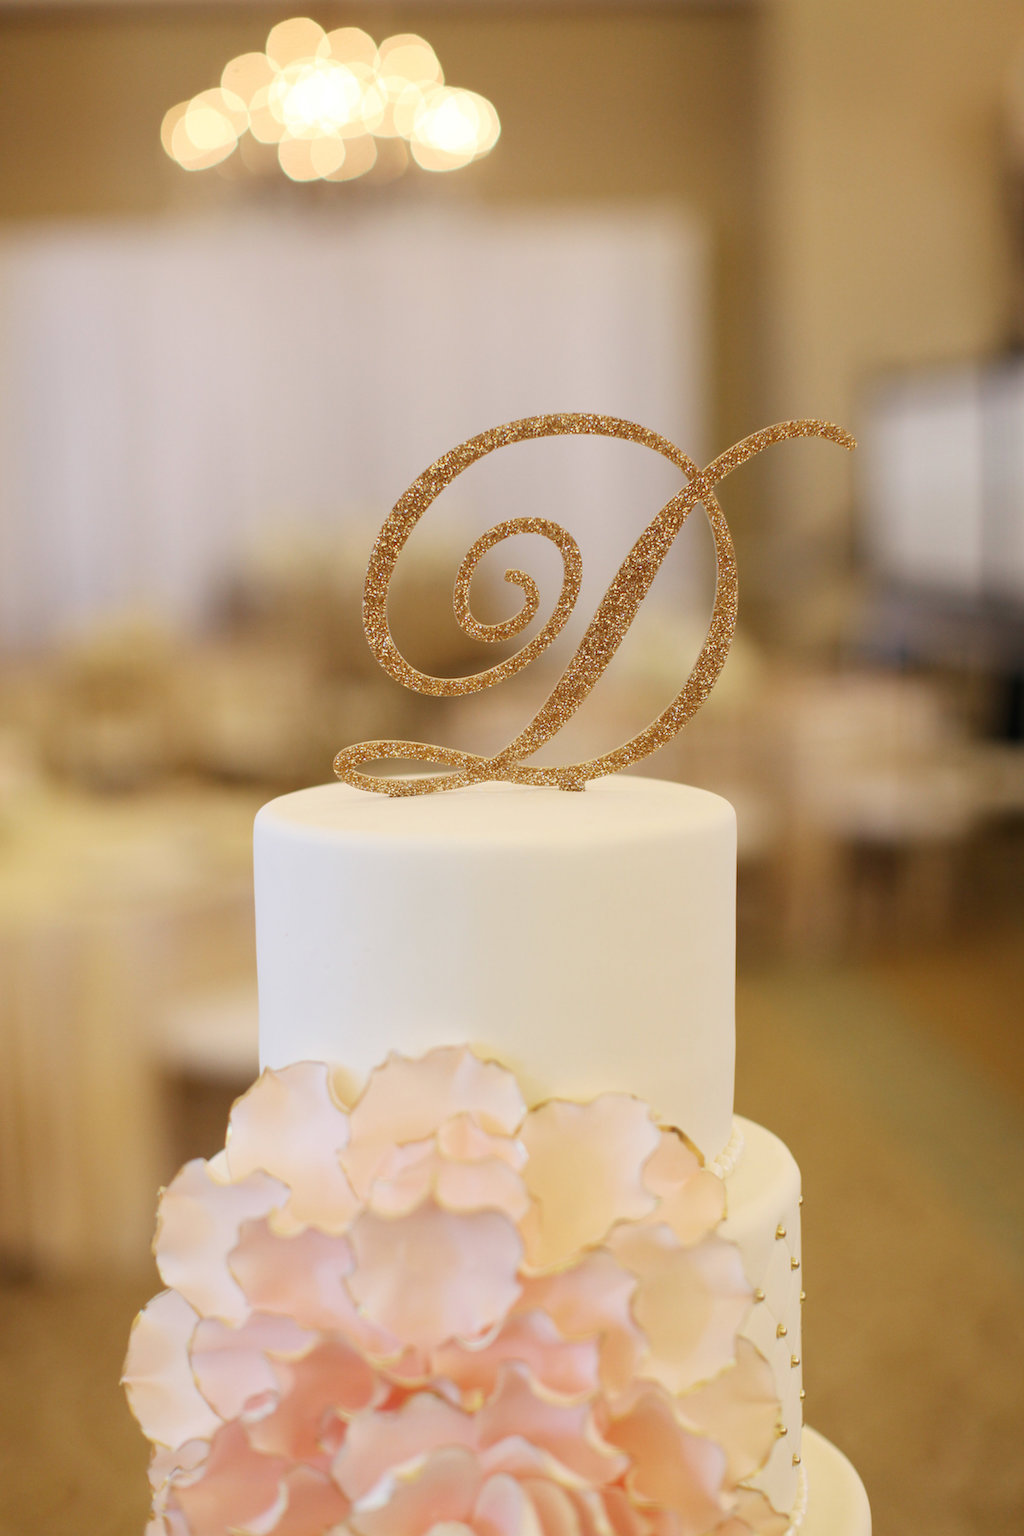 Stylish Gold Glitter Initial Cake topper on Round White Wedding Cake with Blush Floral Decor